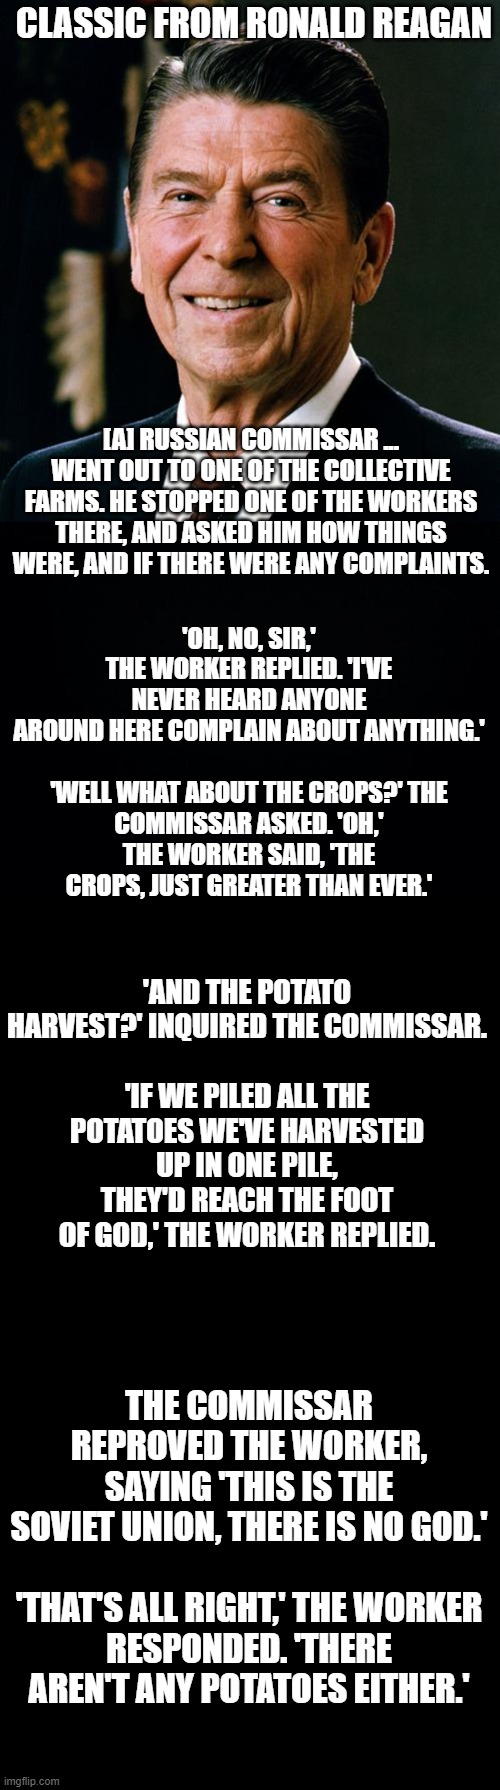 CLASSIC FROM RONALD REAGAN; [A] RUSSIAN COMMISSAR ... WENT OUT TO ONE OF THE COLLECTIVE FARMS. HE STOPPED ONE OF THE WORKERS THERE, AND ASKED HIM HOW THINGS WERE, AND IF THERE WERE ANY COMPLAINTS. 'OH, NO, SIR,' THE WORKER REPLIED. 'I'VE NEVER HEARD ANYONE AROUND HERE COMPLAIN ABOUT ANYTHING.'
 
'WELL WHAT ABOUT THE CROPS?' THE COMMISSAR ASKED. 'OH,' THE WORKER SAID, 'THE CROPS, JUST GREATER THAN EVER.'; 'AND THE POTATO HARVEST?' INQUIRED THE COMMISSAR.
 
'IF WE PILED ALL THE POTATOES WE'VE HARVESTED UP IN ONE PILE, THEY'D REACH THE FOOT OF GOD,' THE WORKER REPLIED. THE COMMISSAR REPROVED THE WORKER, SAYING 'THIS IS THE SOVIET UNION, THERE IS NO GOD.'
 
'THAT'S ALL RIGHT,' THE WORKER RESPONDED. 'THERE AREN'T ANY POTATOES EITHER.' | image tagged in ronald reagan face,black background | made w/ Imgflip meme maker